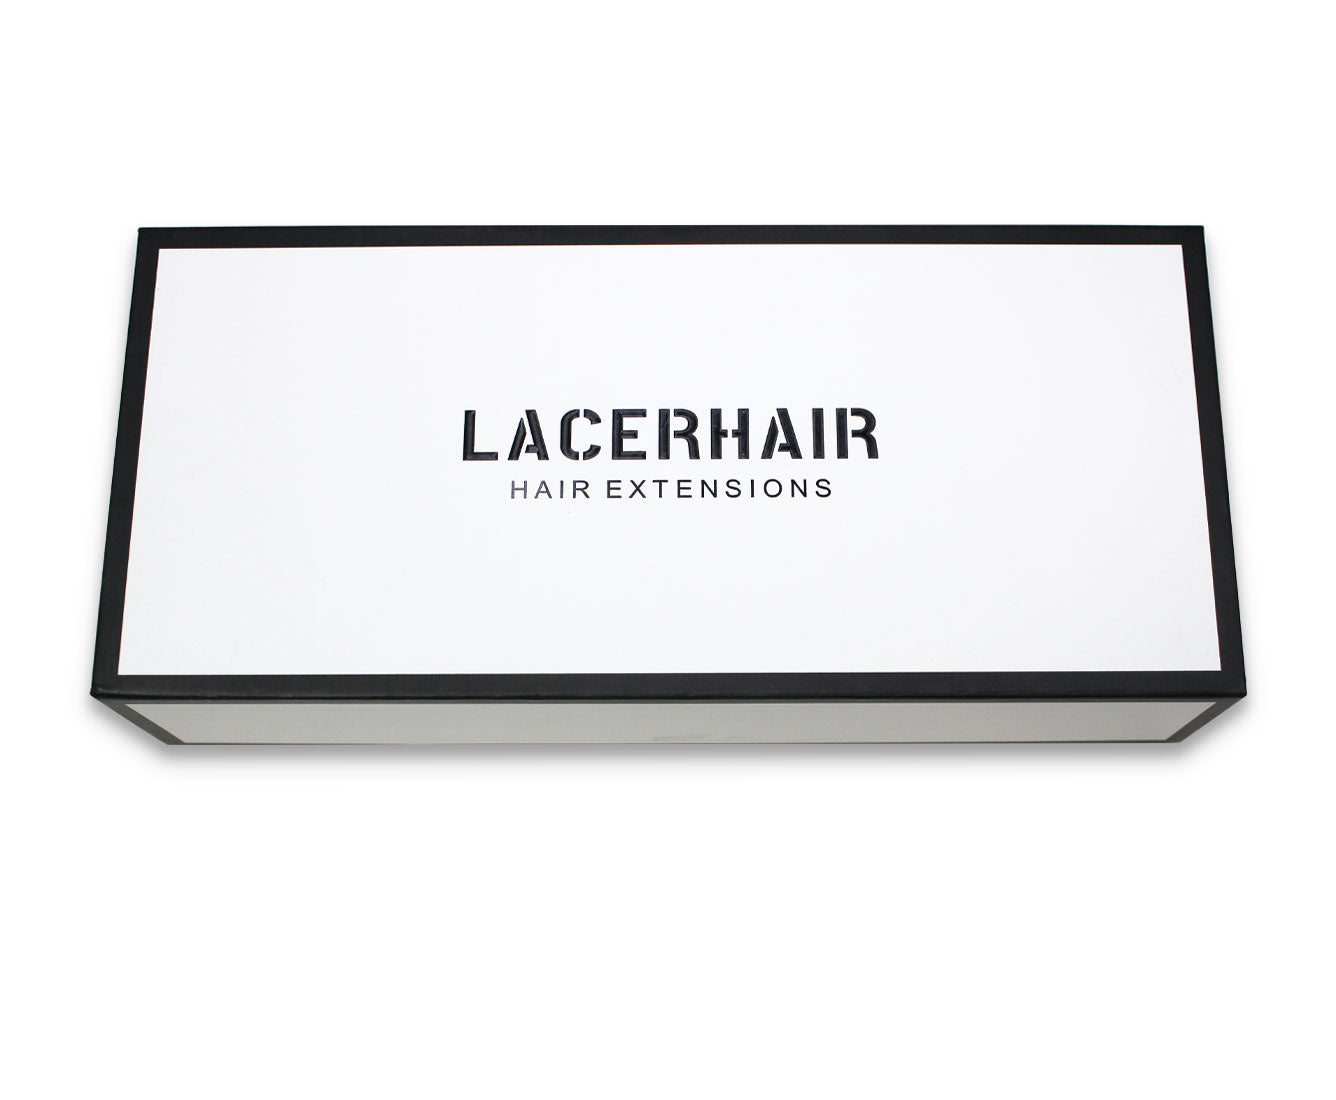 Tape-in Hair Extensions #60A Light Platinum Blond